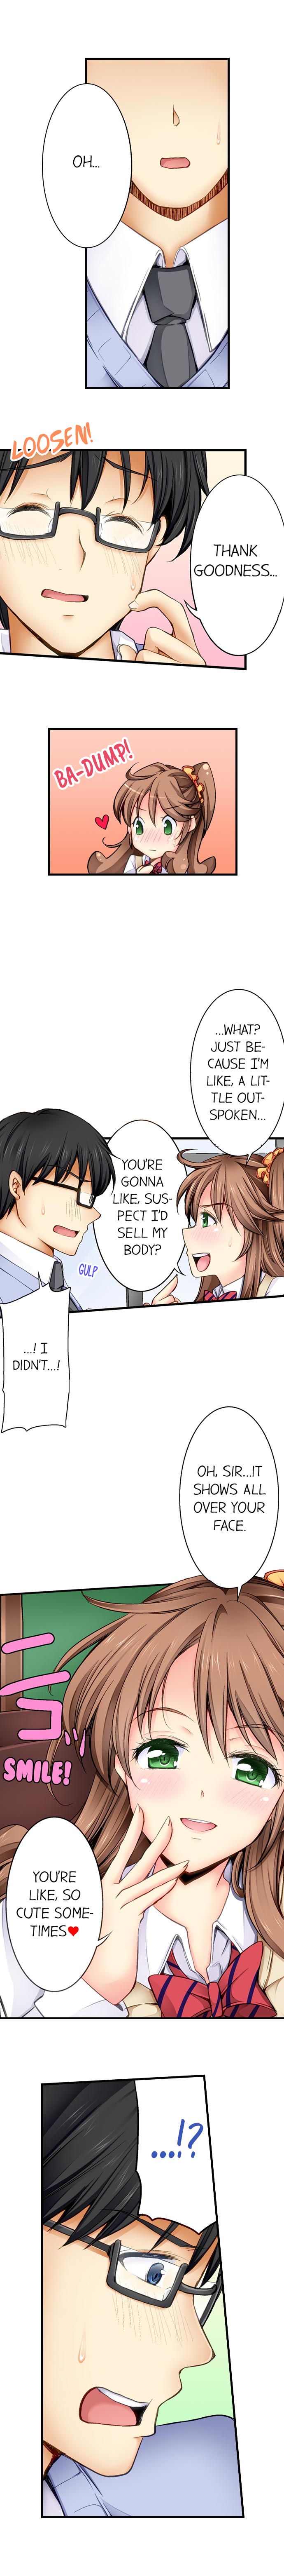 Why Can't i Have Sex With My Teacher? - Chapter 1 Page 6